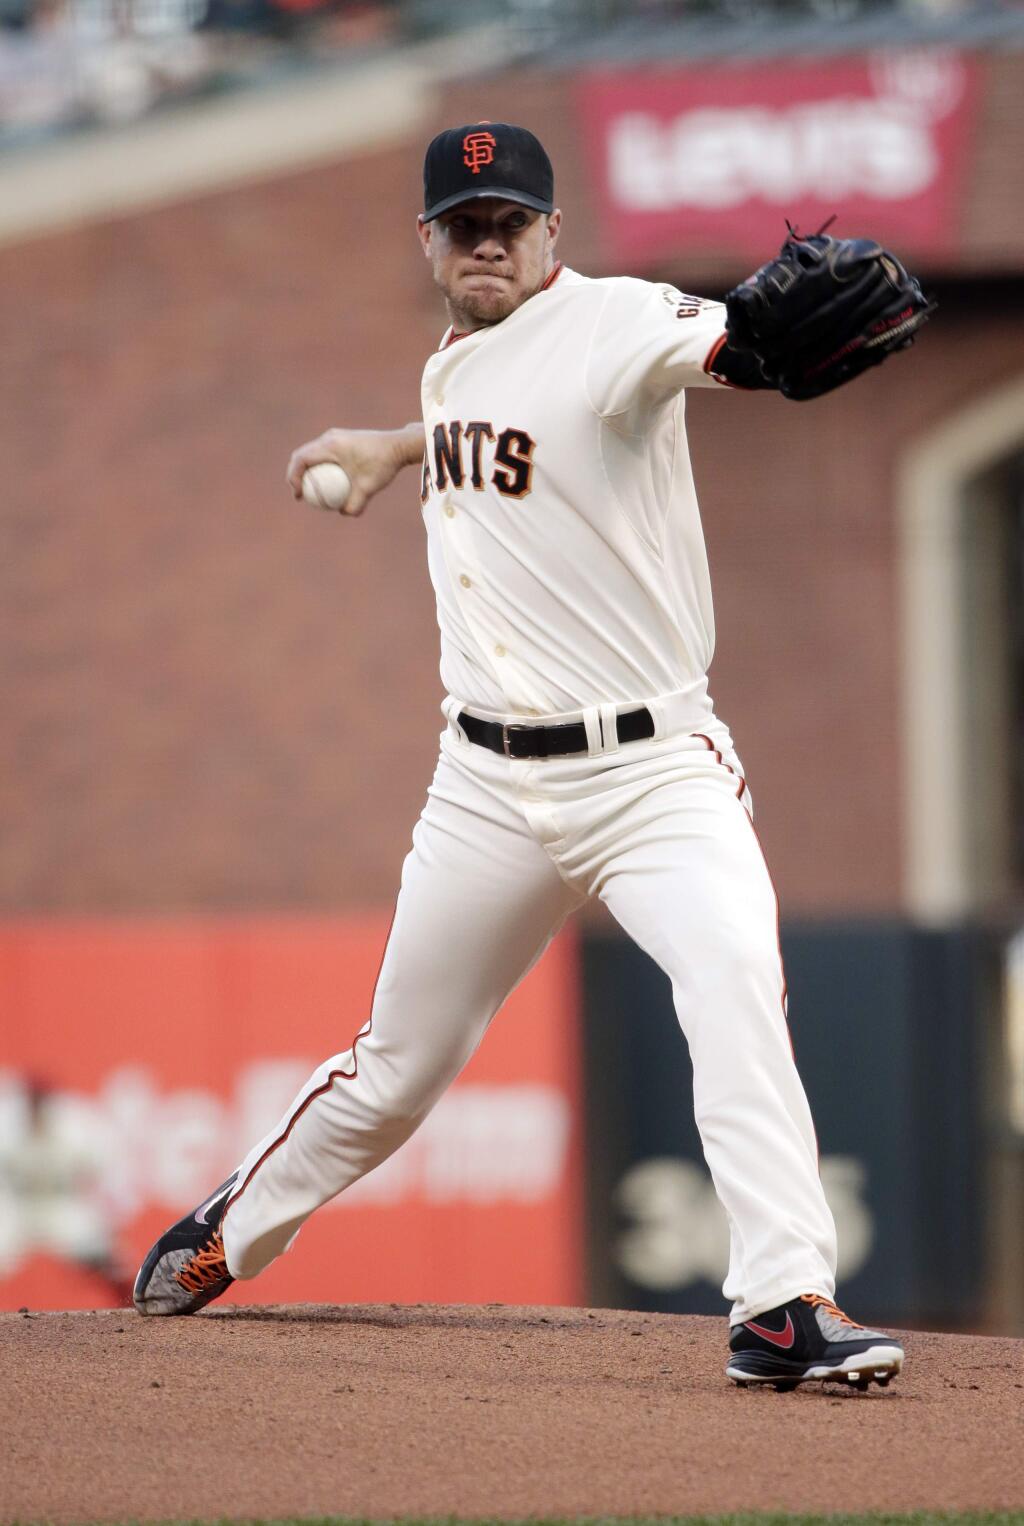 San Francisco Giants starting pitcher Jake Peavy throws to the Colorado Rockies during the first inning of a baseball game Monday, Aug. 25, 2014, in San Francisco. (AP Photo/Marcio Jose Sanchez)